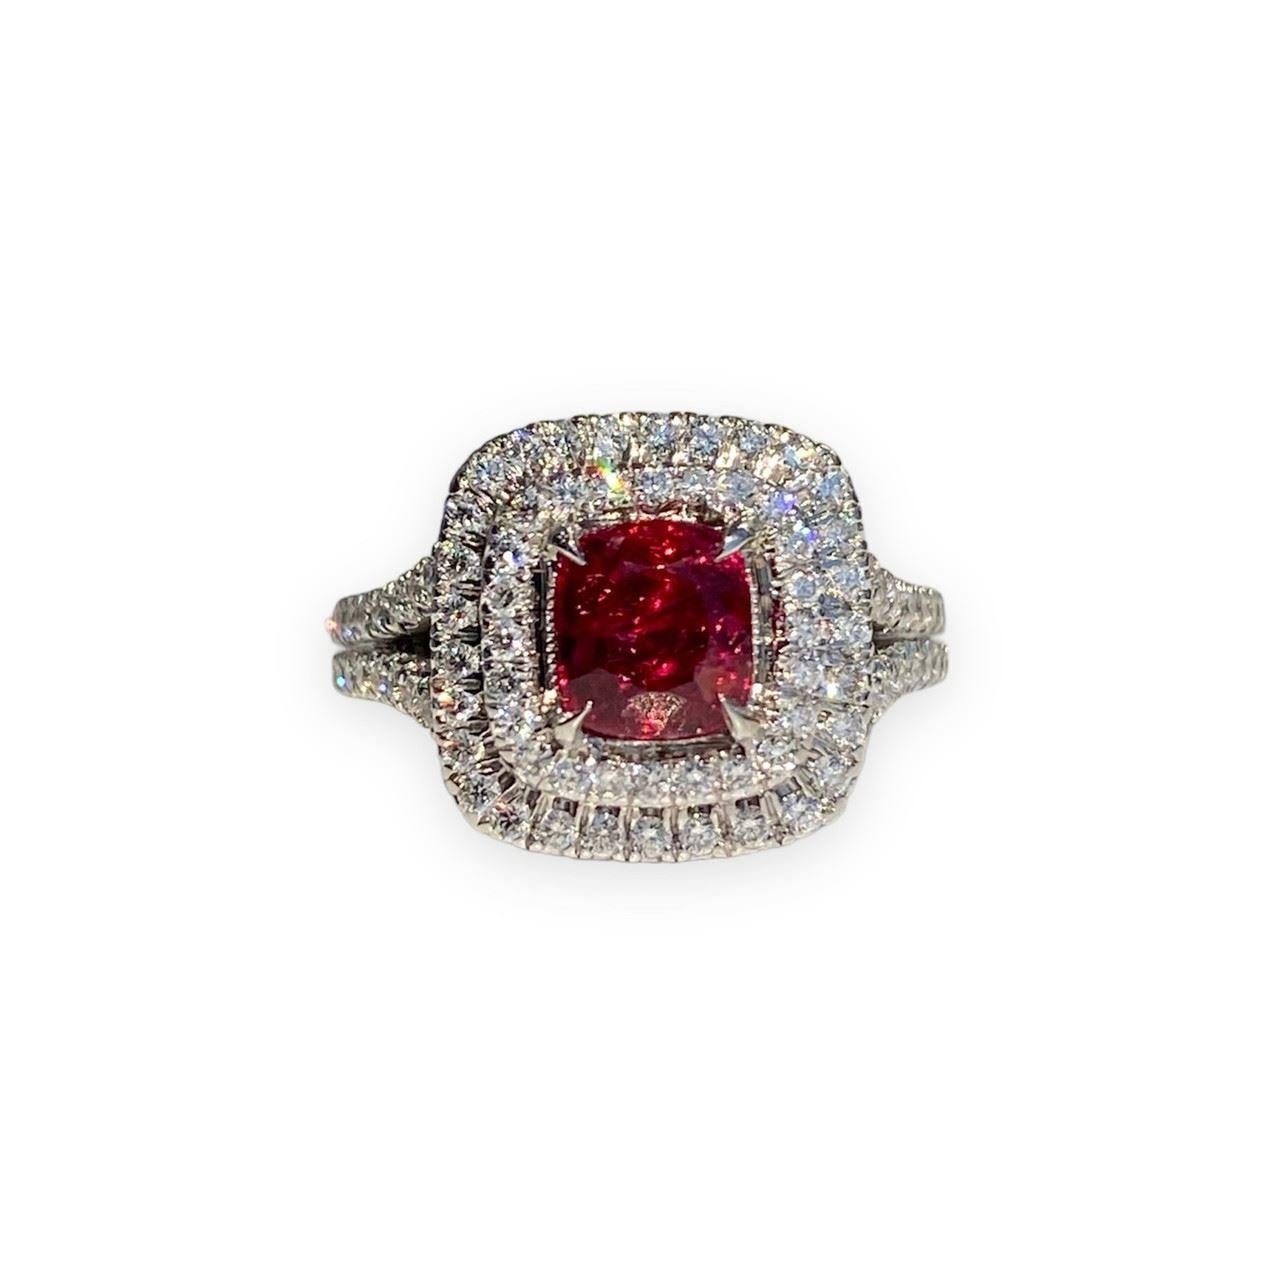 Specifications:

    Pre-Owned (Great condition)
    Metal: Platinum
    Weight: 7.9 Gr
    Main Stone: 0.78ct Red Spinel
    Side Stones: 0.39ctw Diamonds
    Color: F
    Clarity: VS
    Size: 4 US




